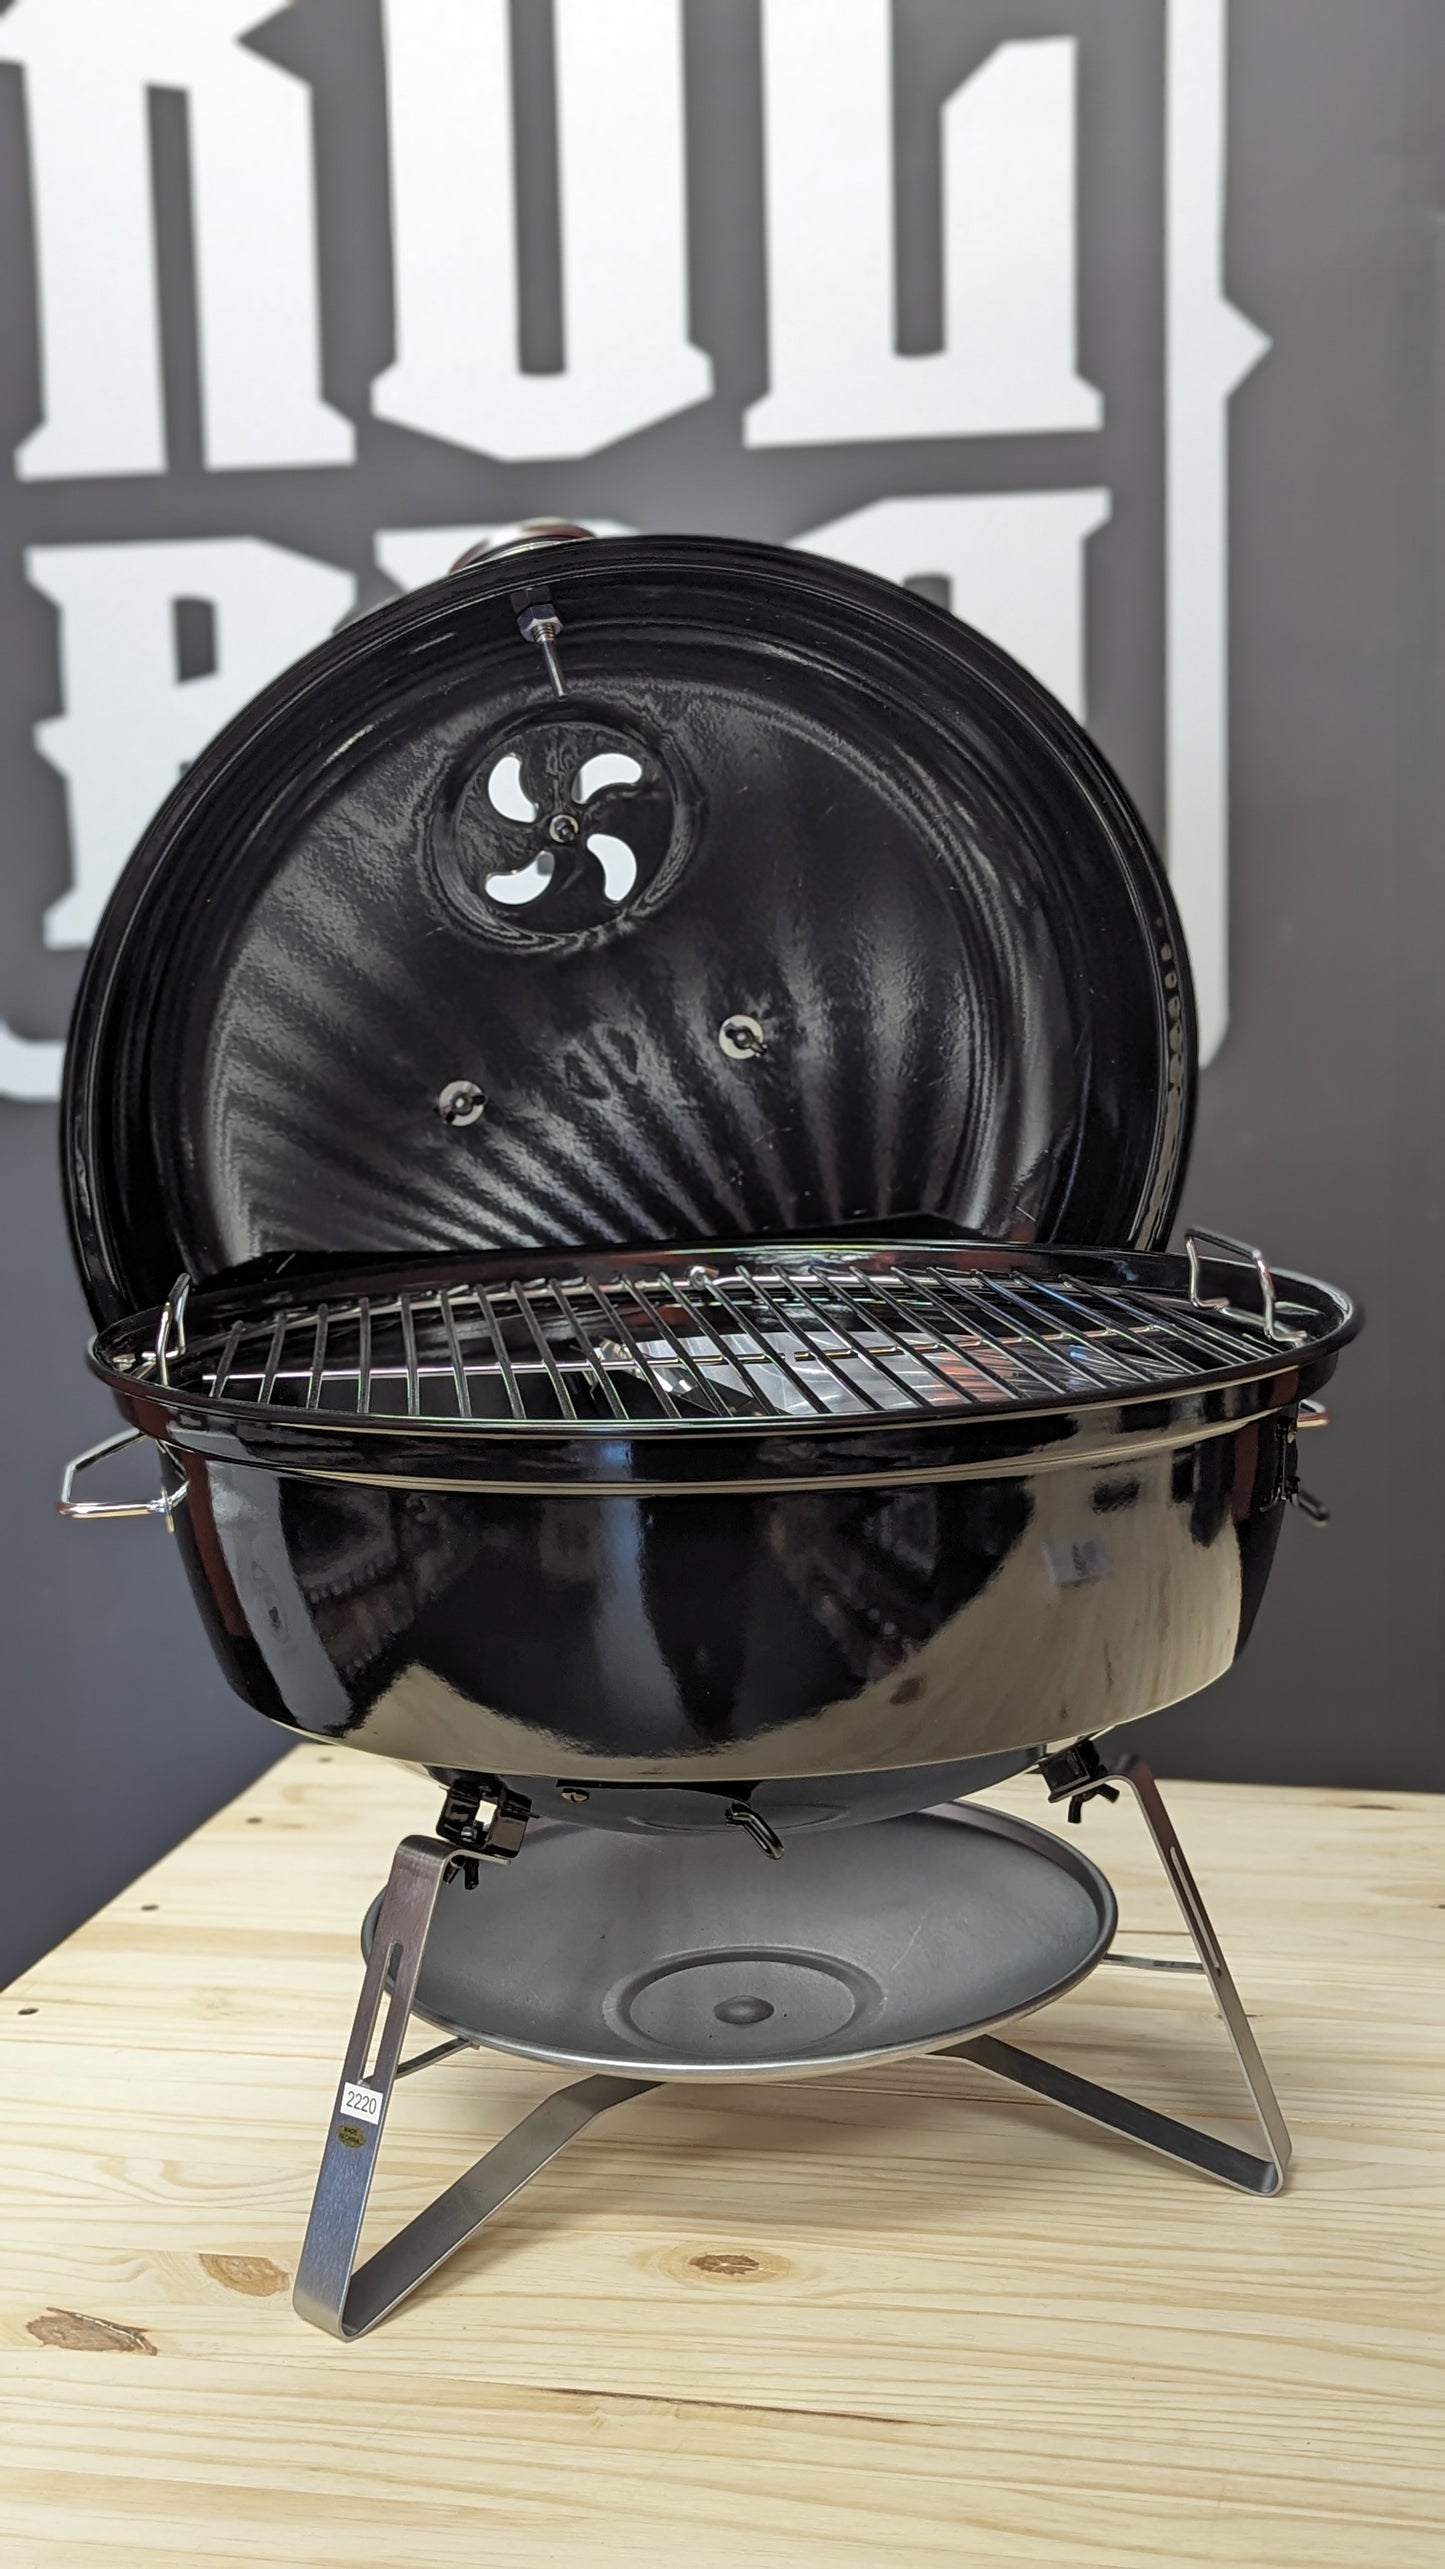 Slow 'N Sear 18" Travel Kettle Charcoal Grill